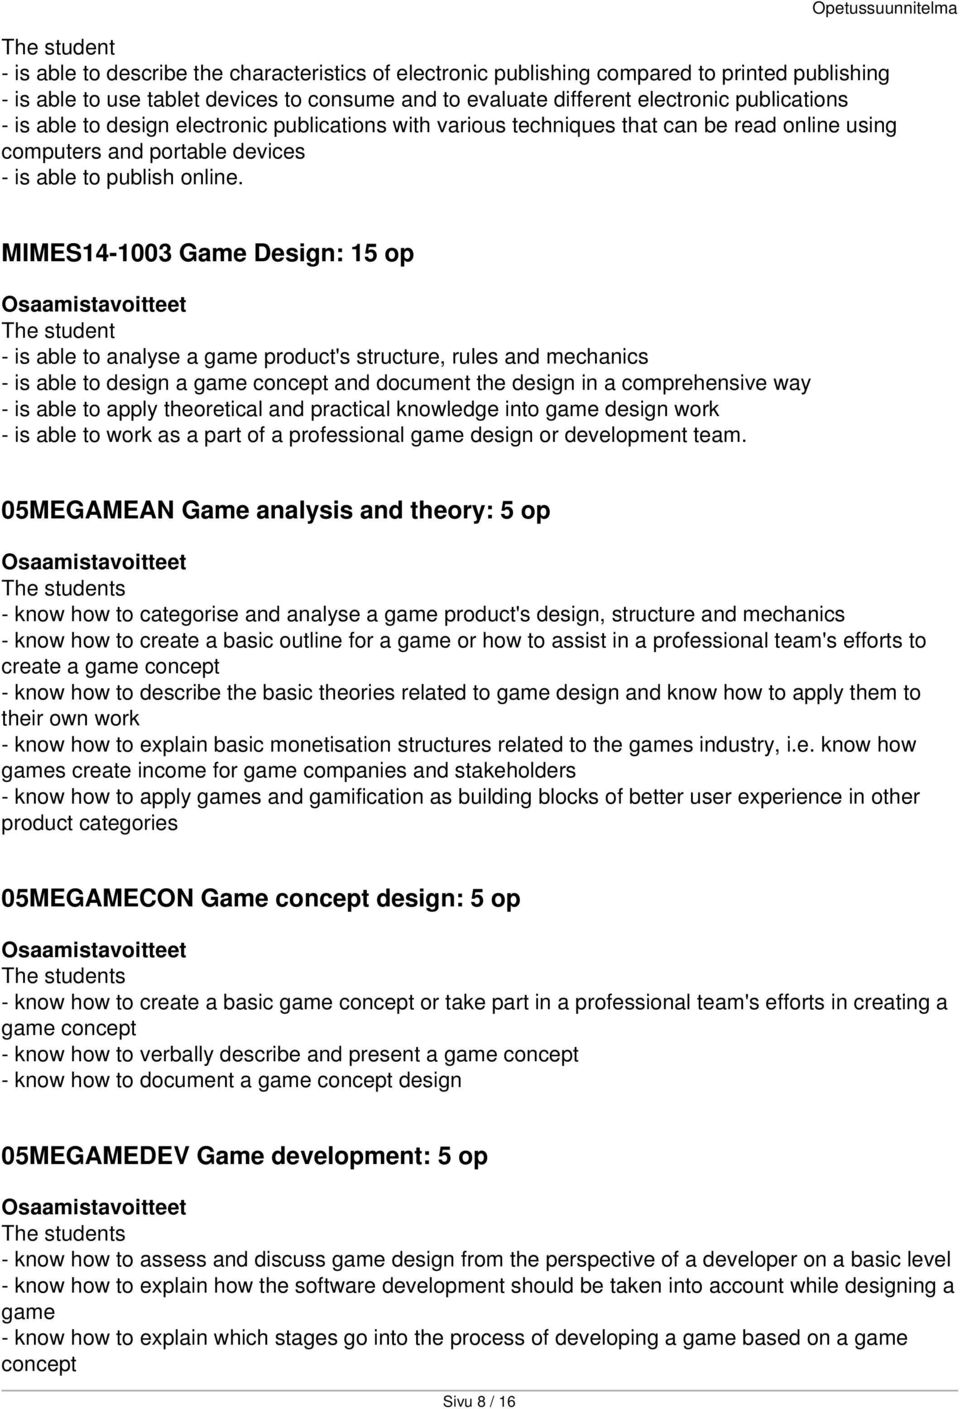 MIMES14-1003 Game Design: 15 op The student - is able to analyse a game product's structure, rules and mechanics - is able to design a game concept and document the design in a comprehensive way - is